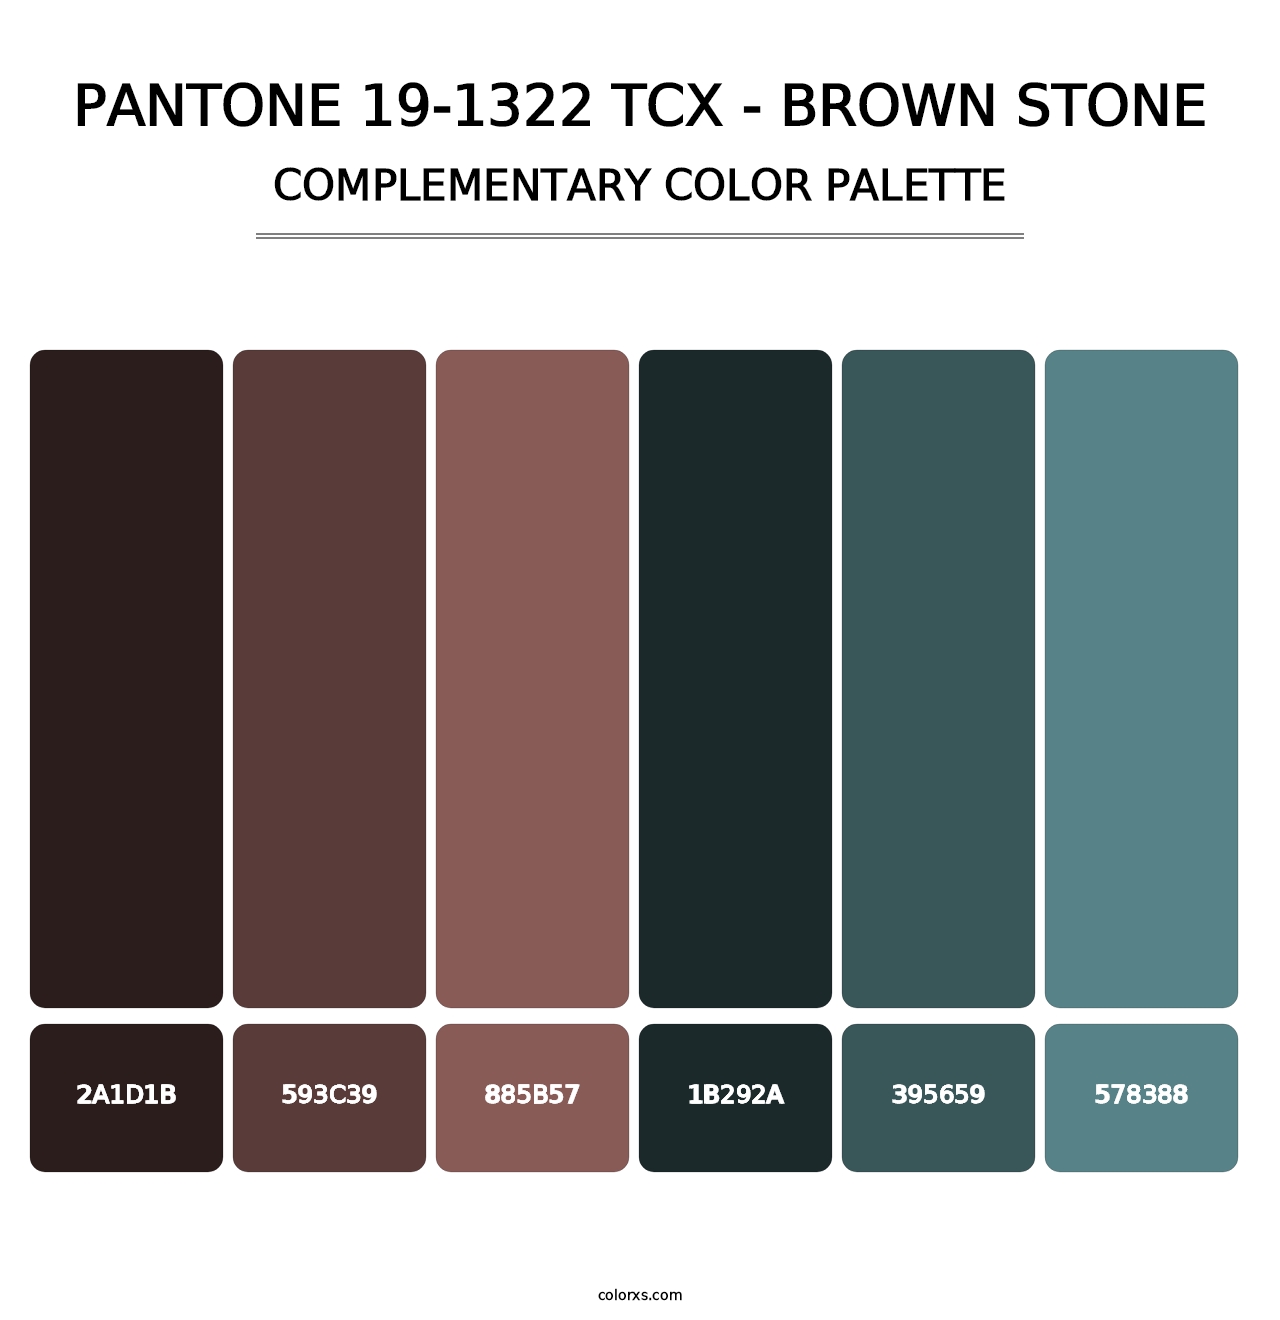 PANTONE 19-1322 TCX - Brown Stone - Complementary Color Palette